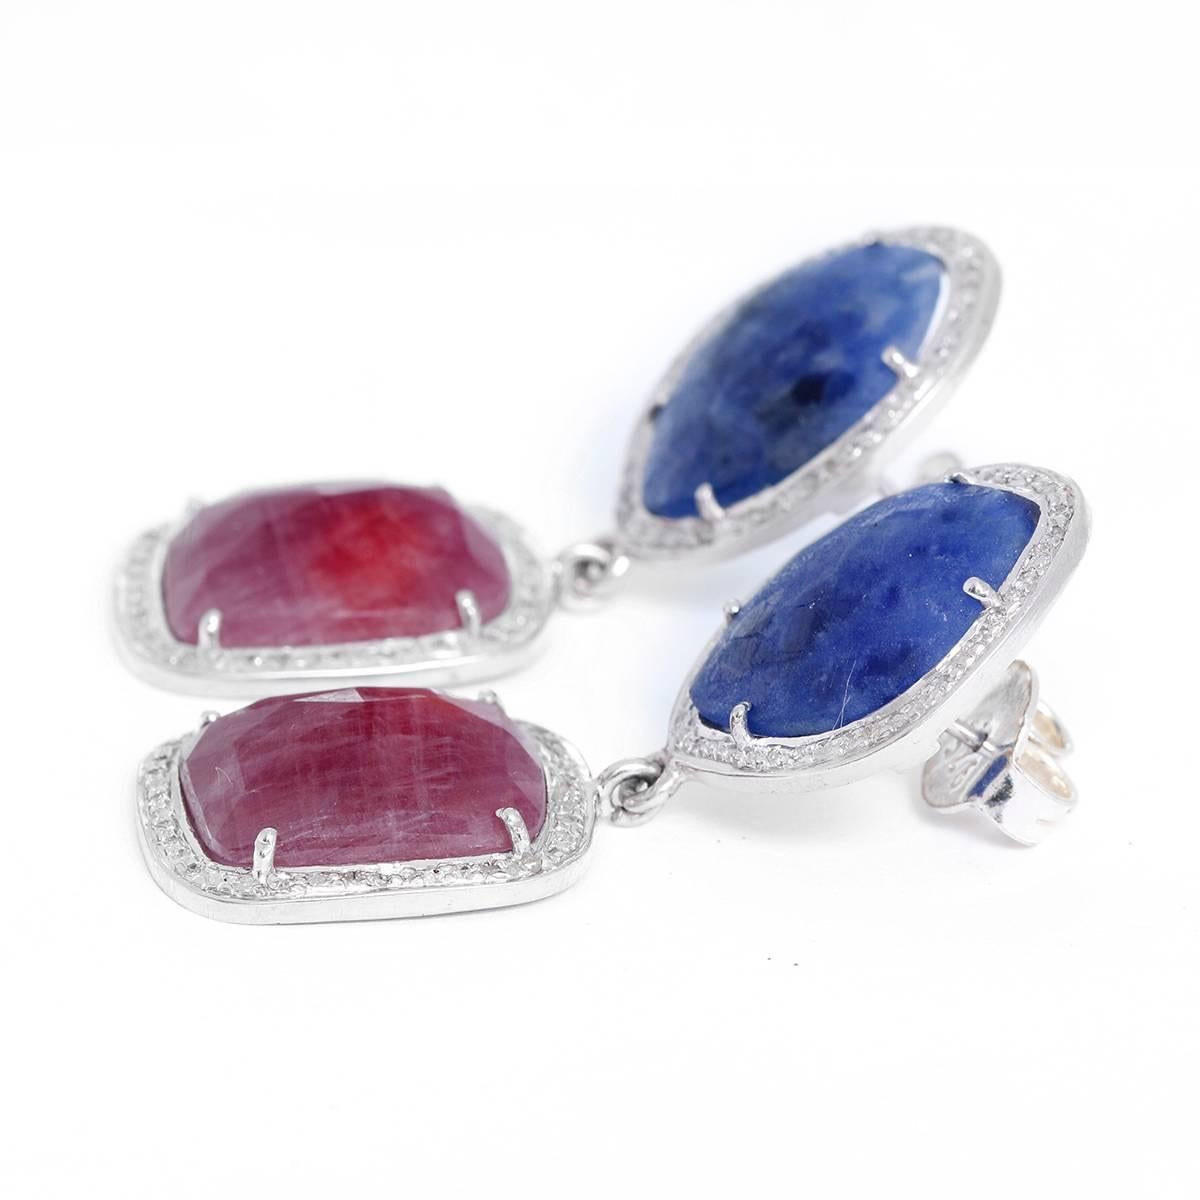 These bohemian inspired earrings feature sapphires and 1 ctw. of diamonds set in silver. Total weight is 16.1 grams. Earrings measure apx. 2-inches in length.